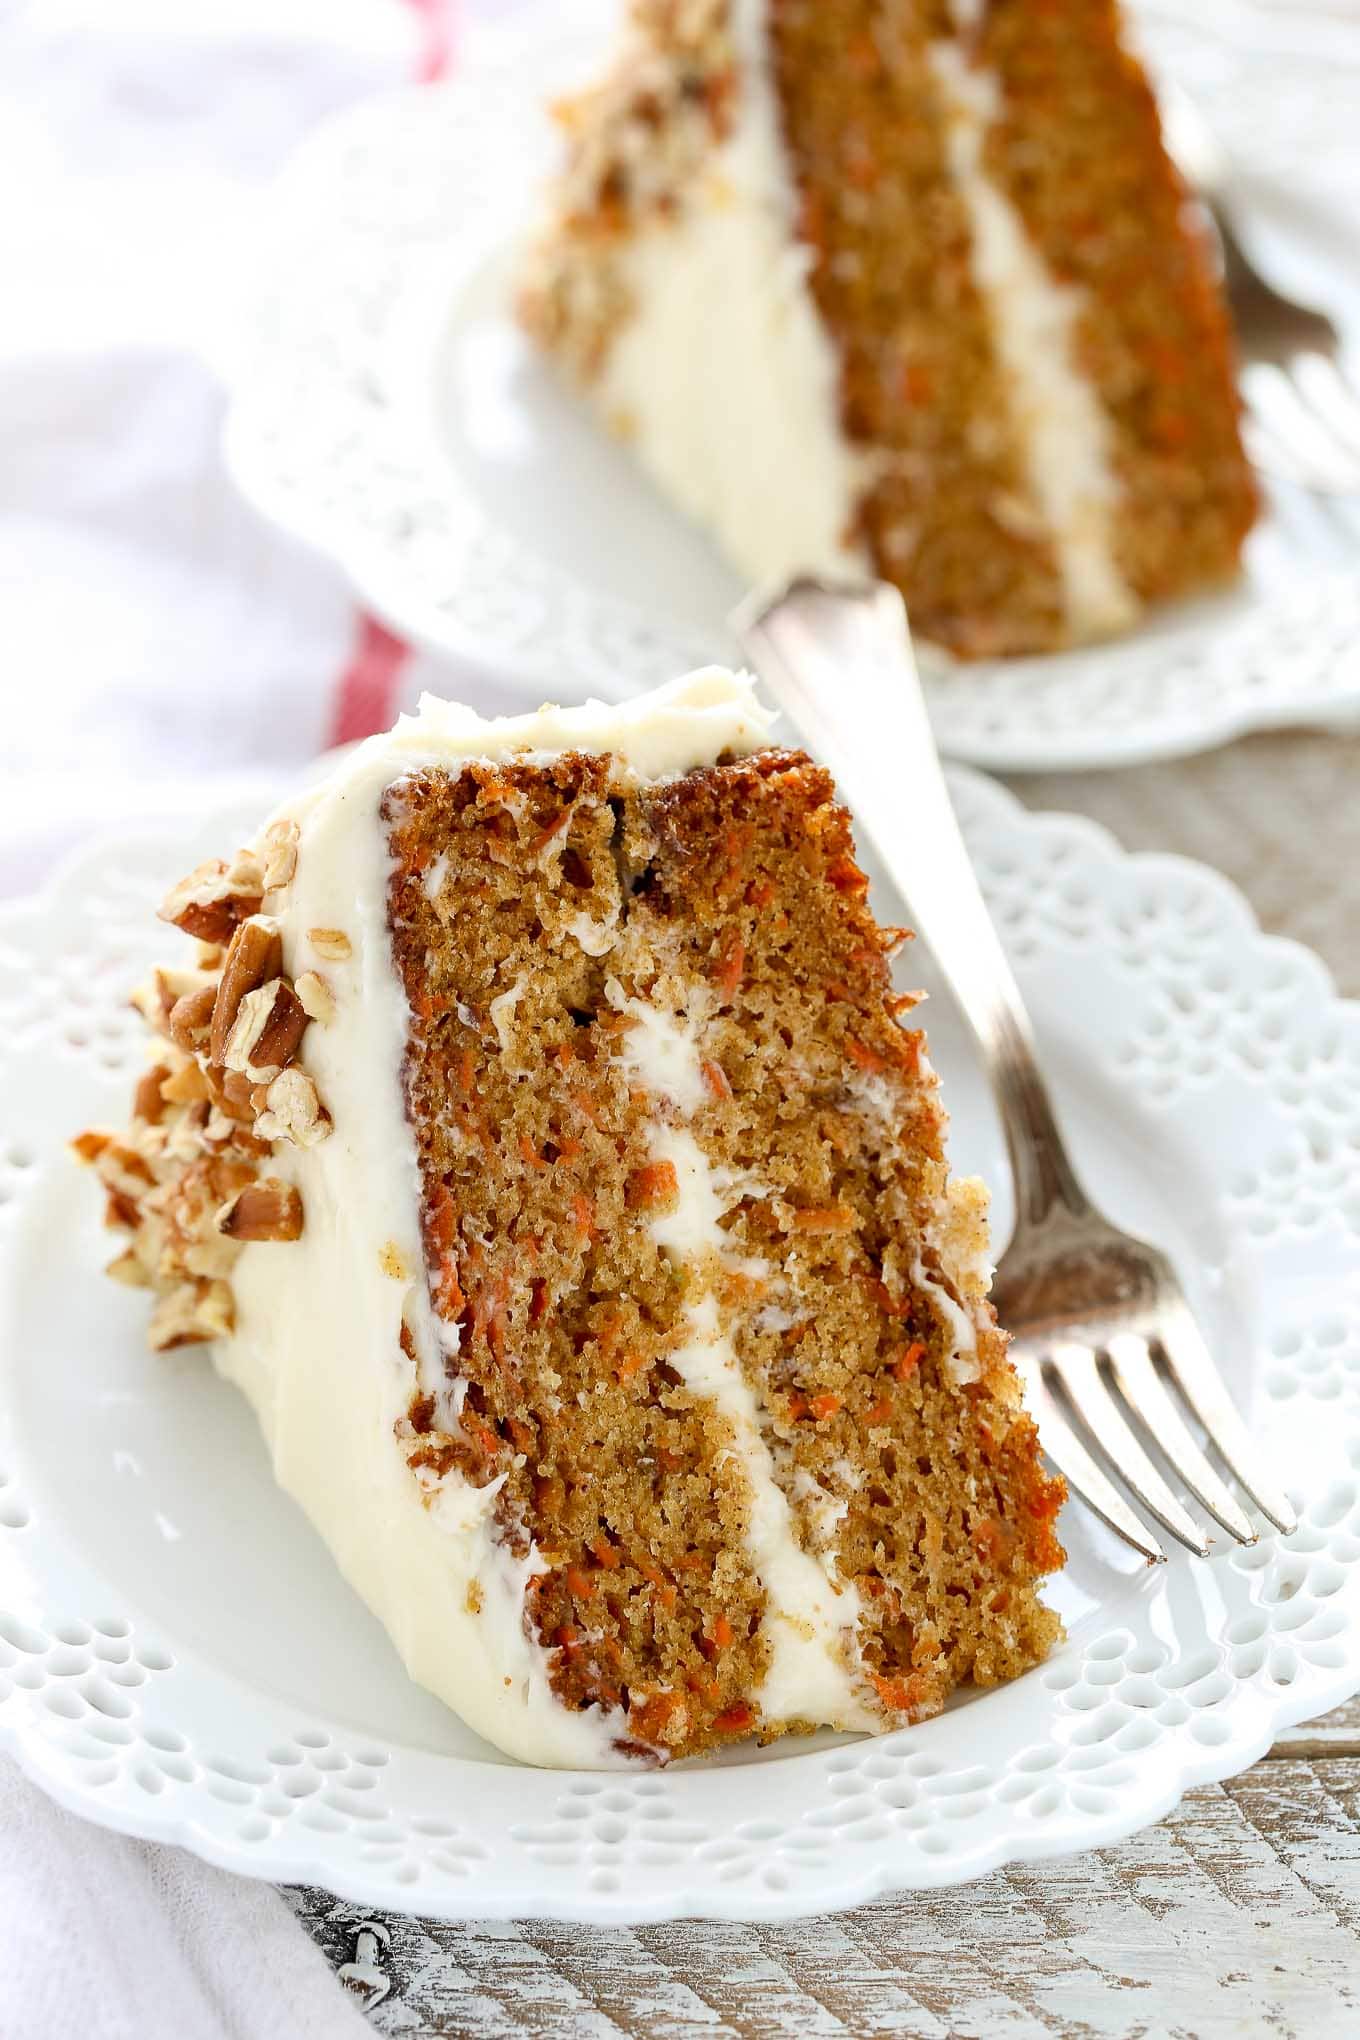 Two slices of carrot cake on separate decorative white plates. A fork rests on the side of each plate.